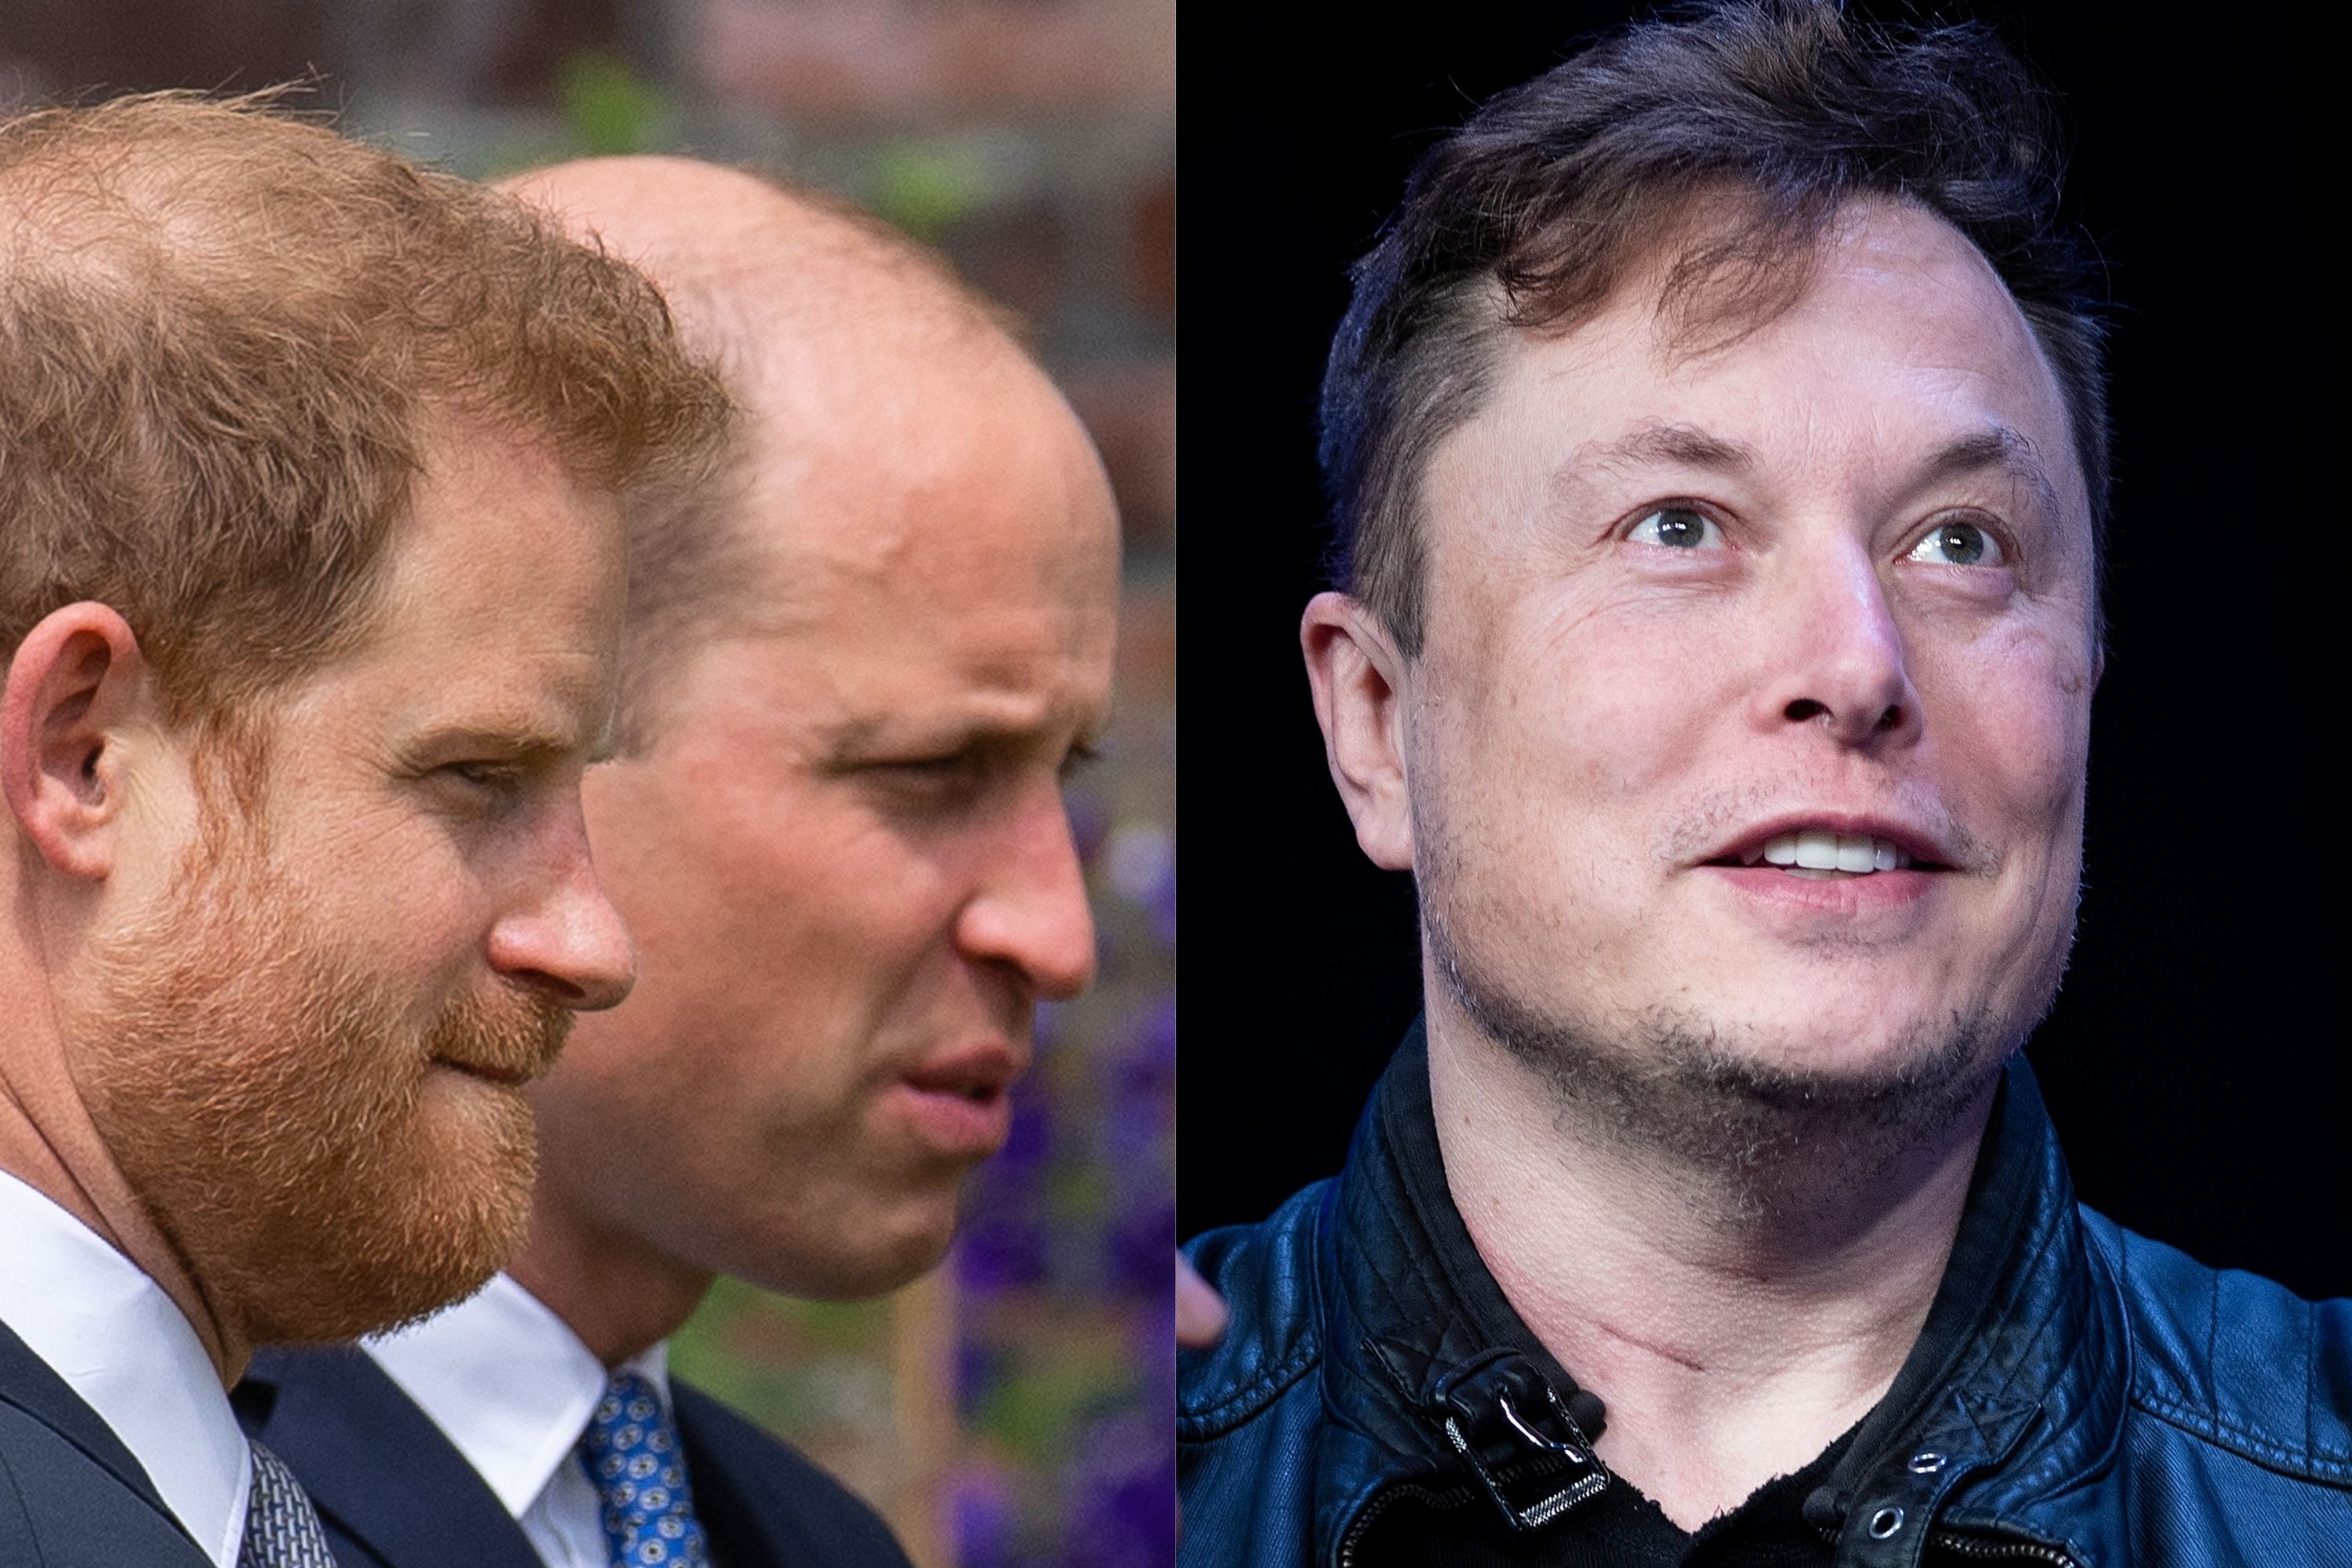 Elon Musk Slams Population Concerns Raised by Princes Harry and William